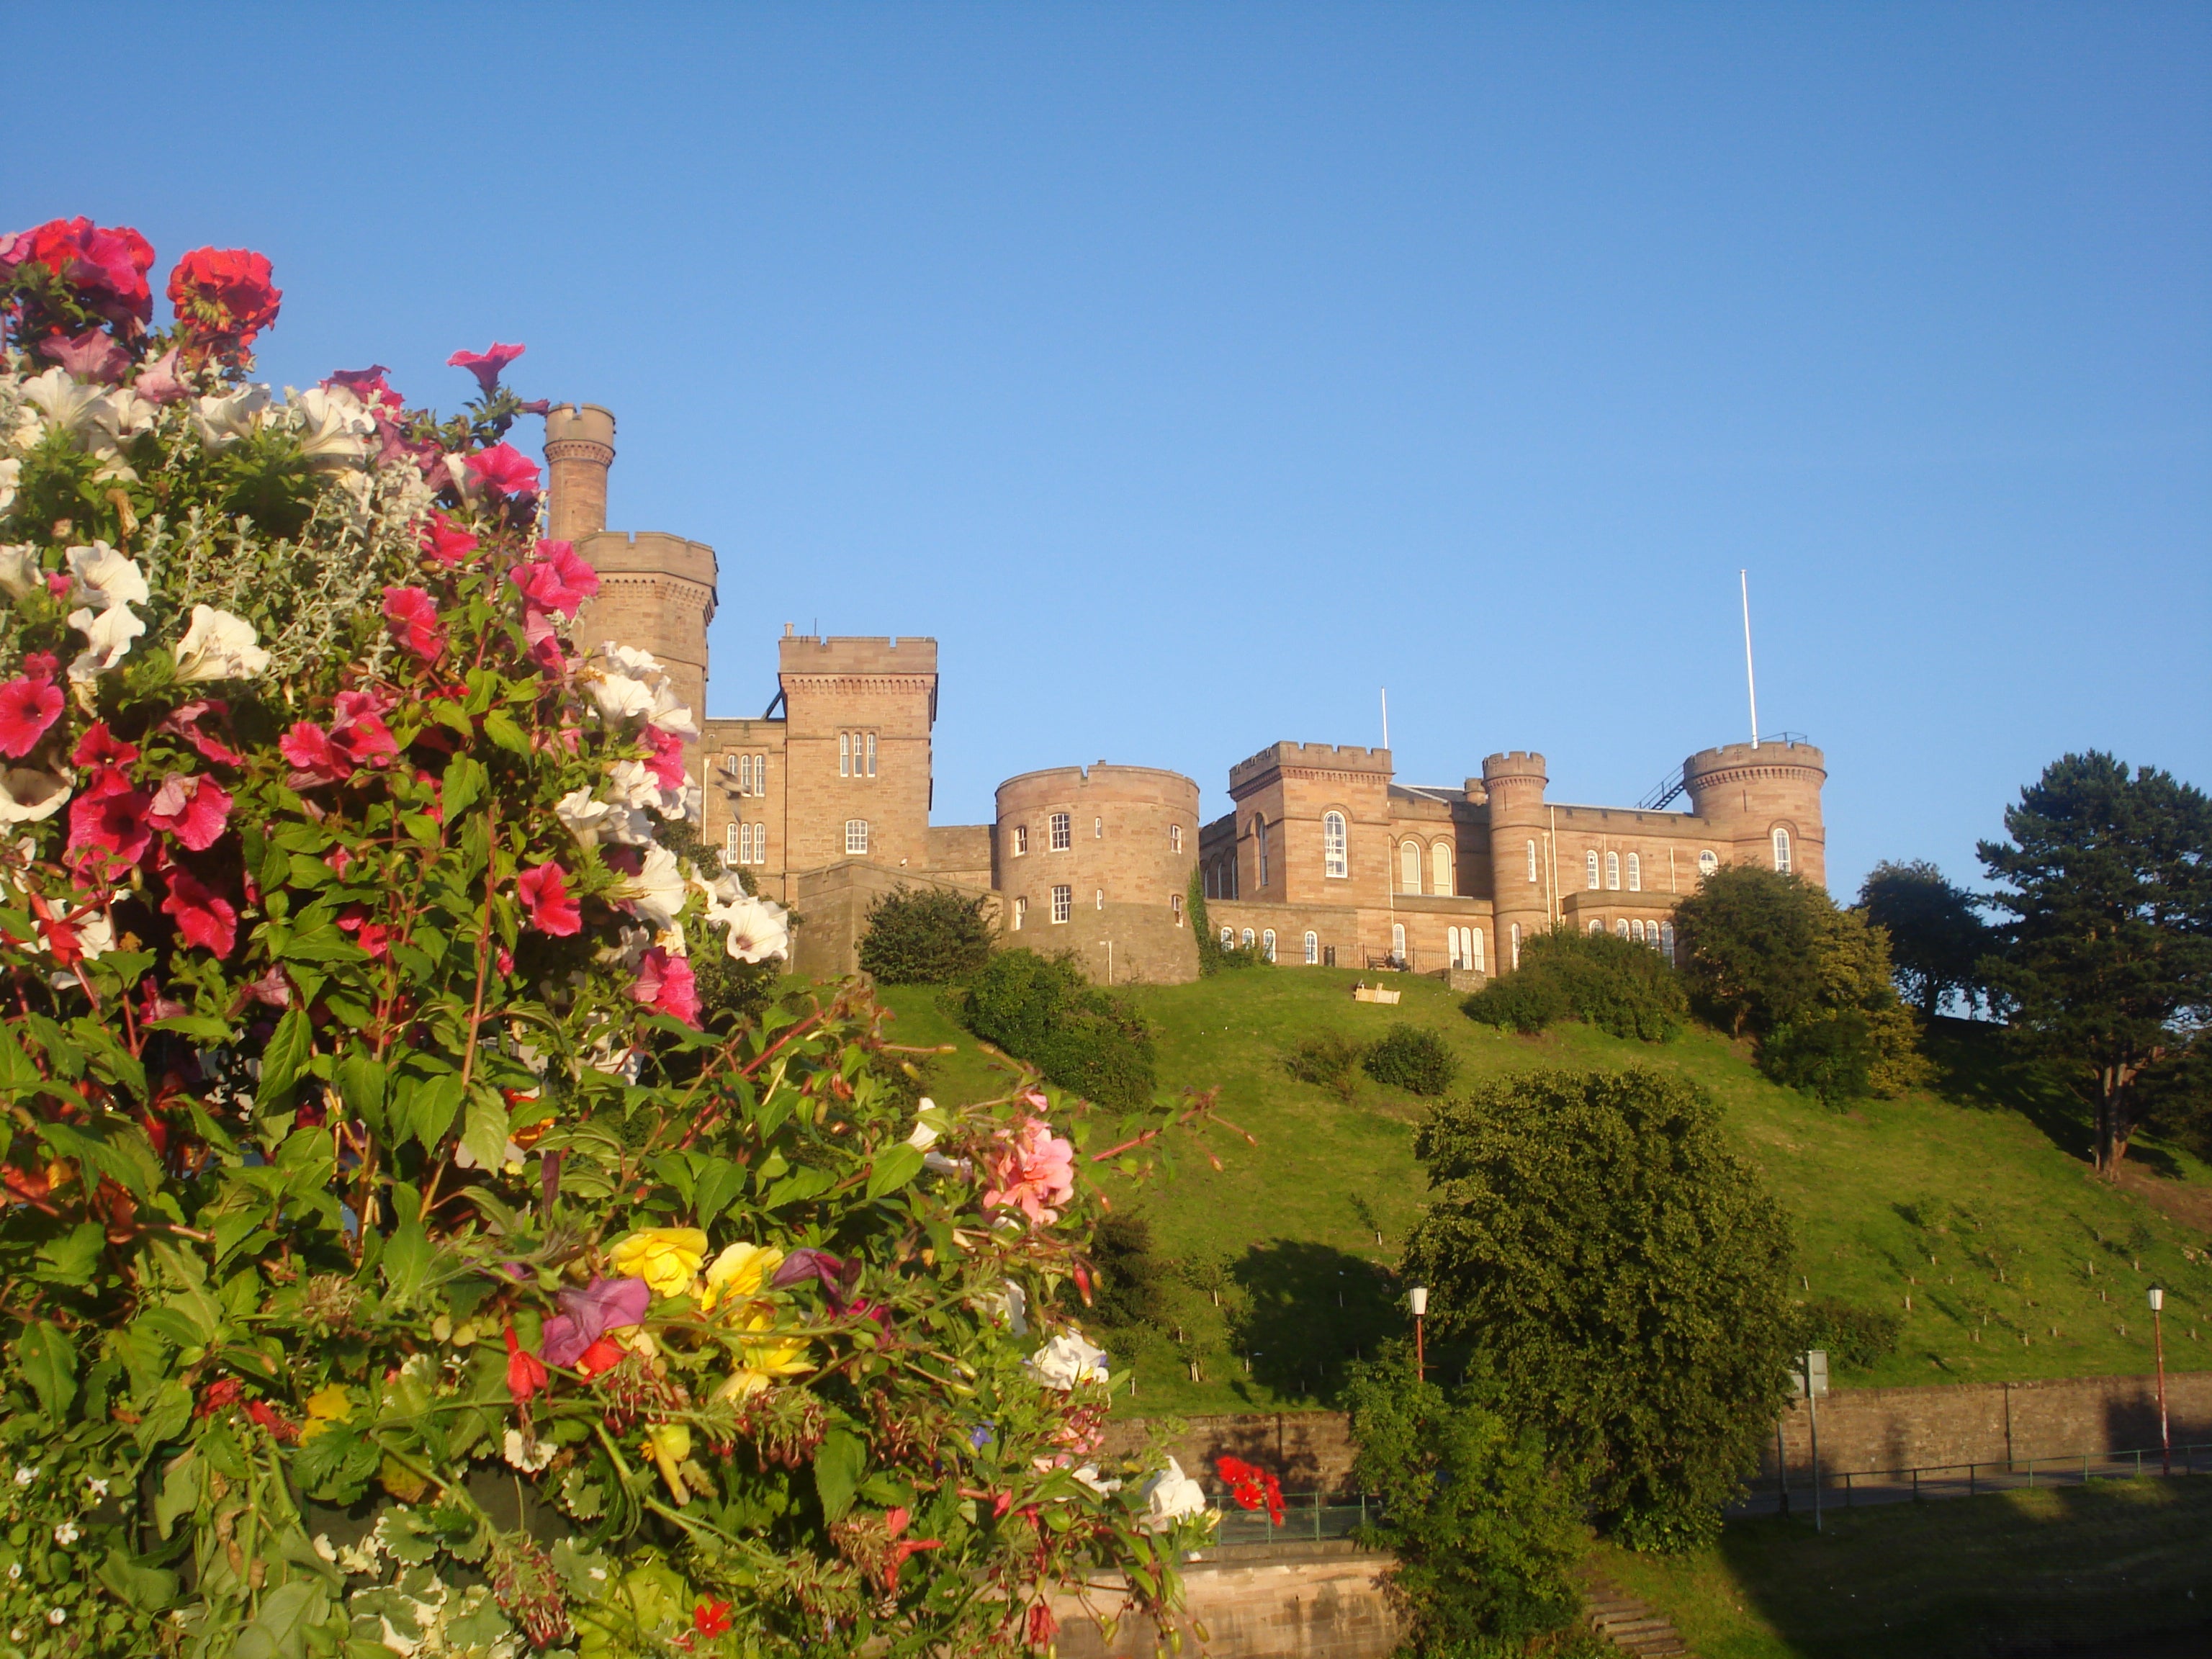 Quick! Inverness Castle during one of the brief patches of clear skies in the least sunny city in Britain